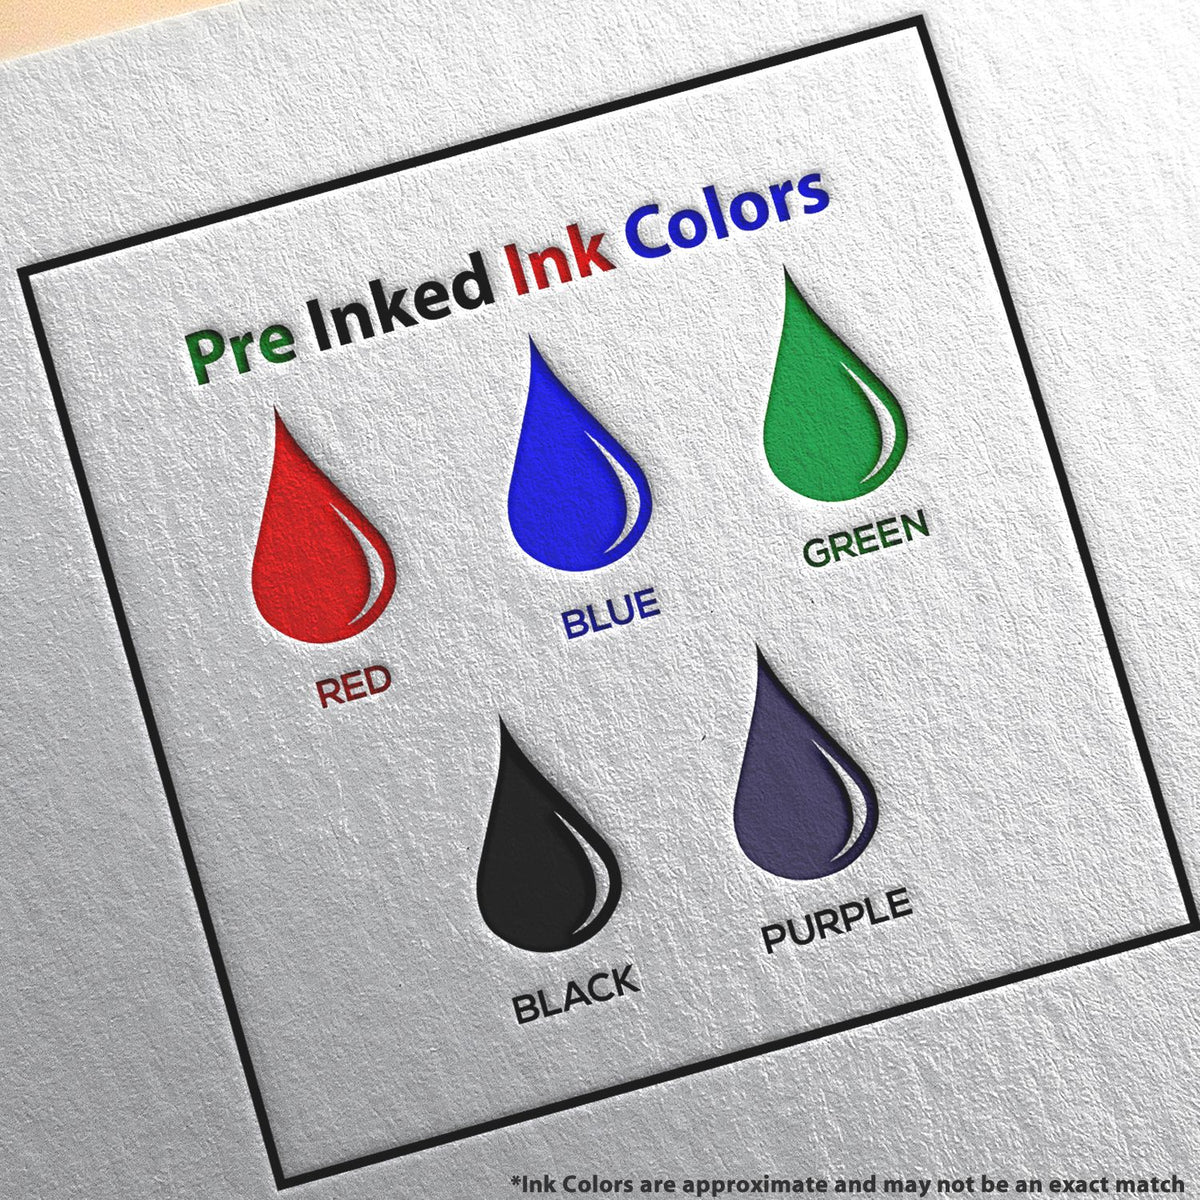 A picture showing the different ink colors or hues available for the MaxLight Premium Pre-Inked Oregon Rectangular Notarial Stamp product.